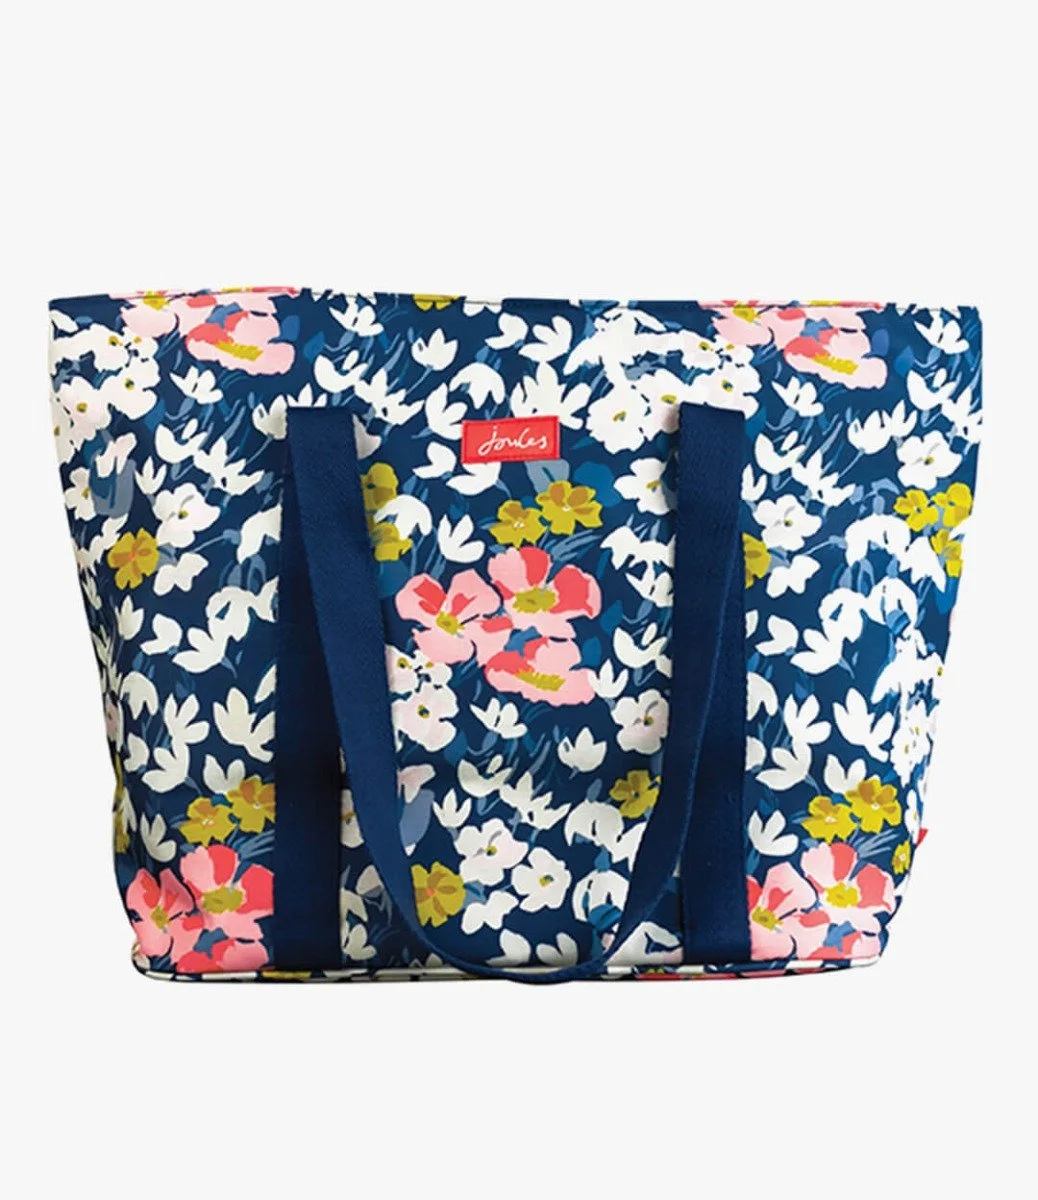 Lunch Tote Bag - Floral by Joules